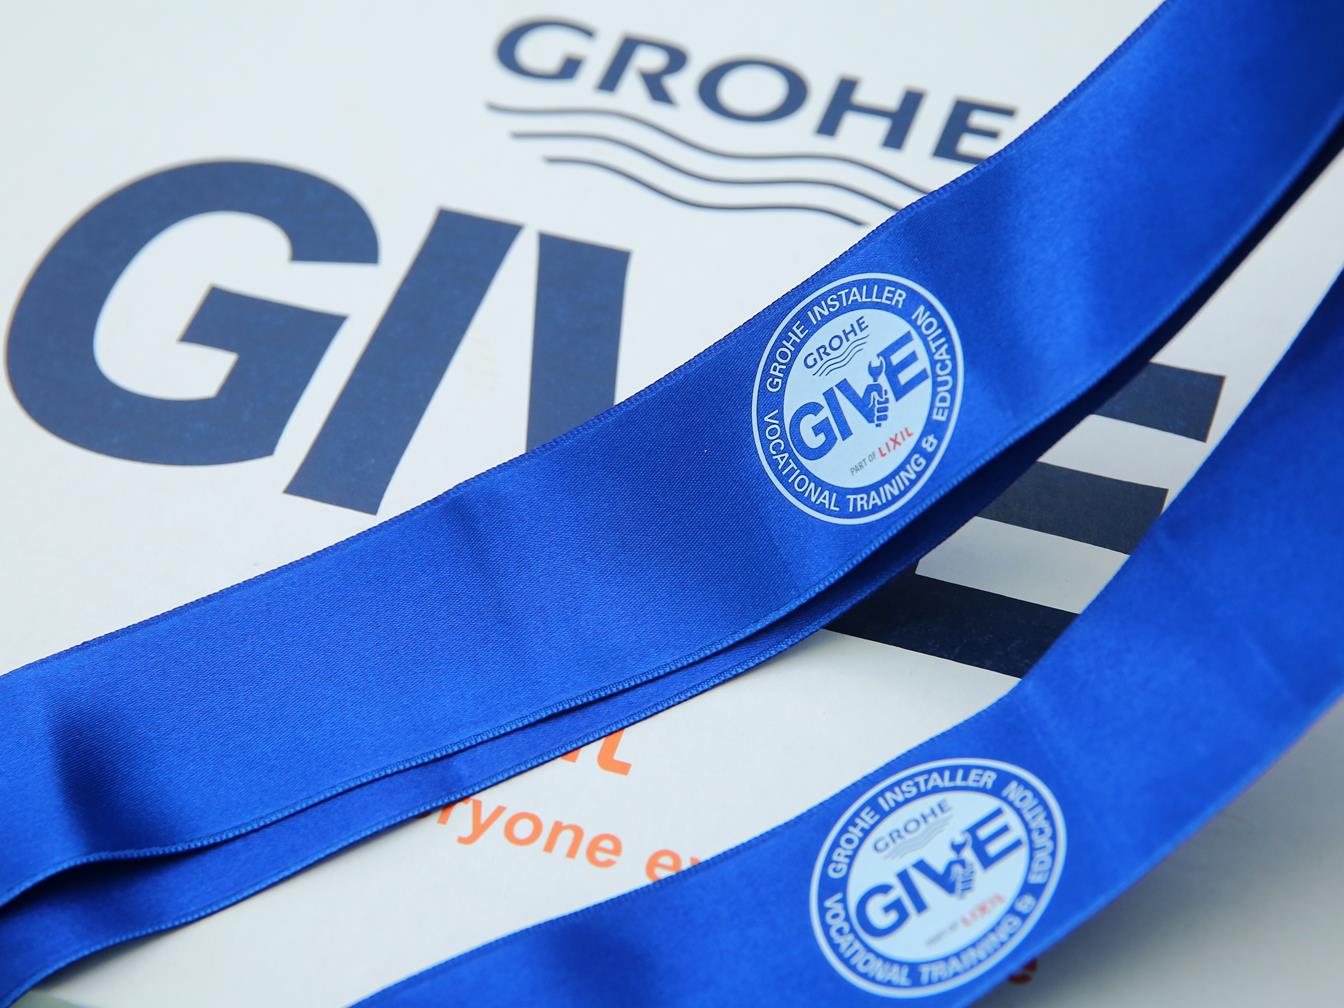 GROHE-GIVE_CR-Split_01-3